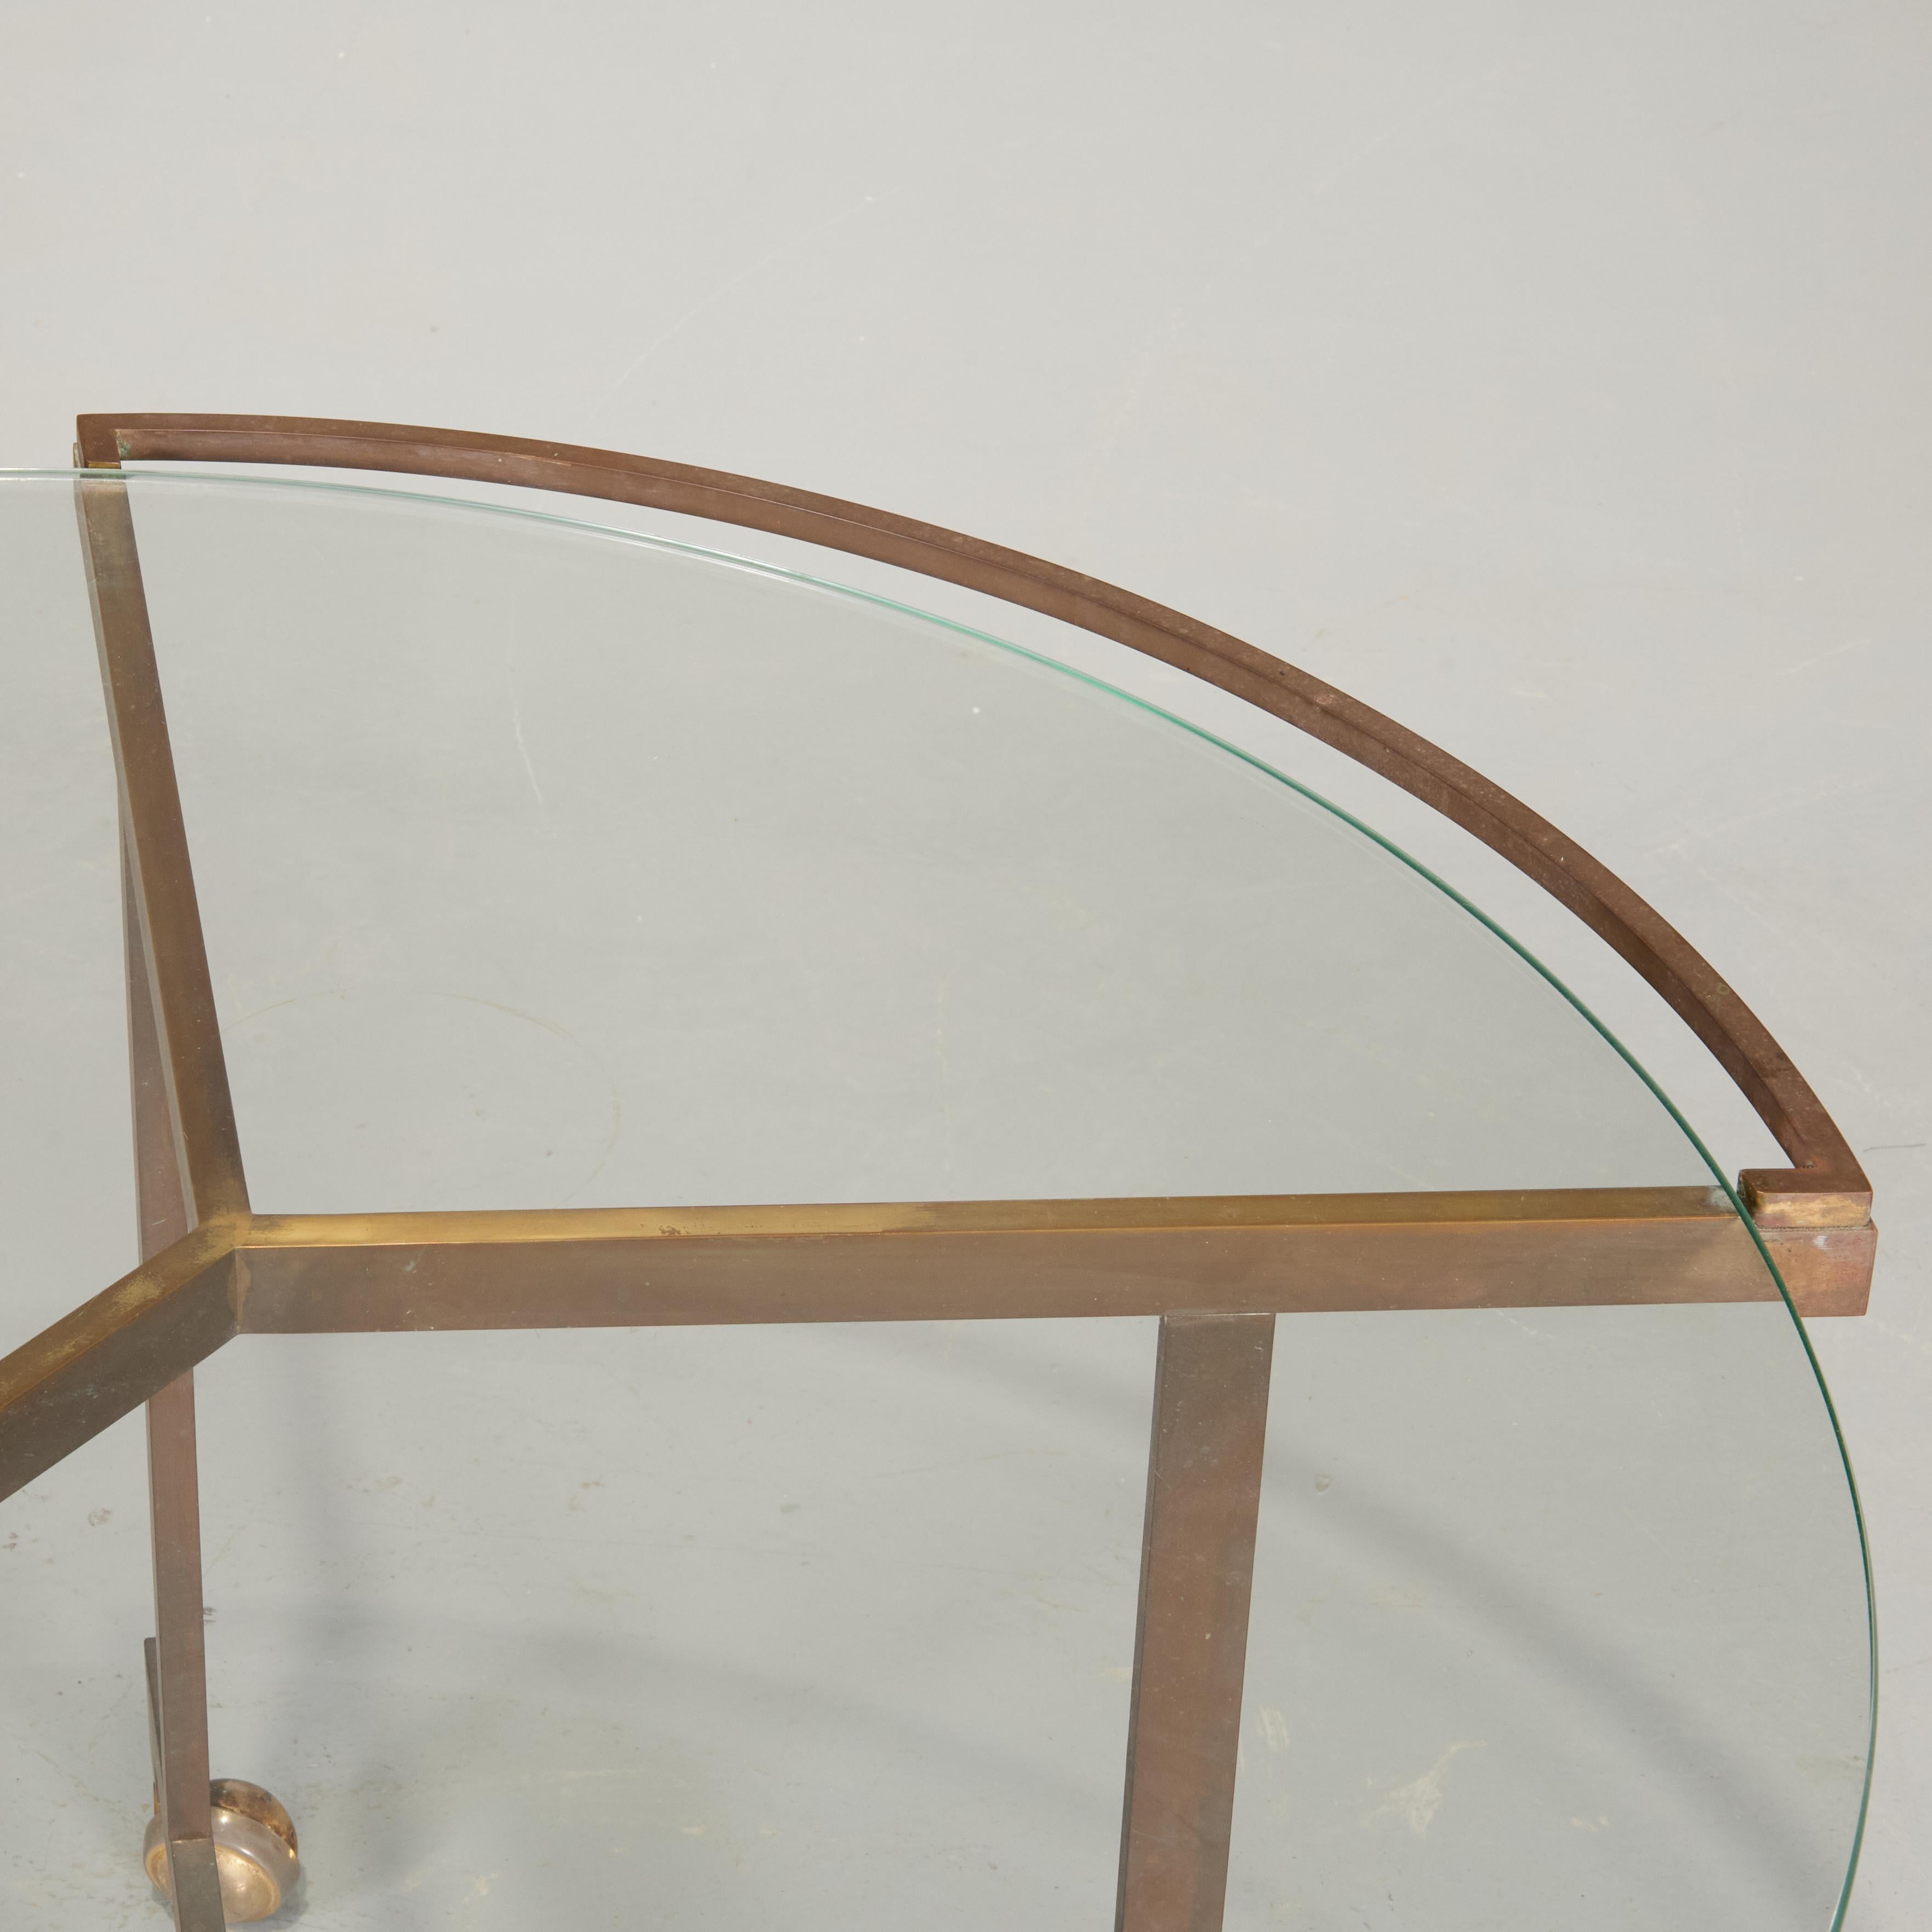 Chic and rare brass table with glass top. Raised on casters and with elegant curved handles, this would make a stirking bar or serving table, but can also double as a coffee table. The brass has taken on a lovely bronzed patina.